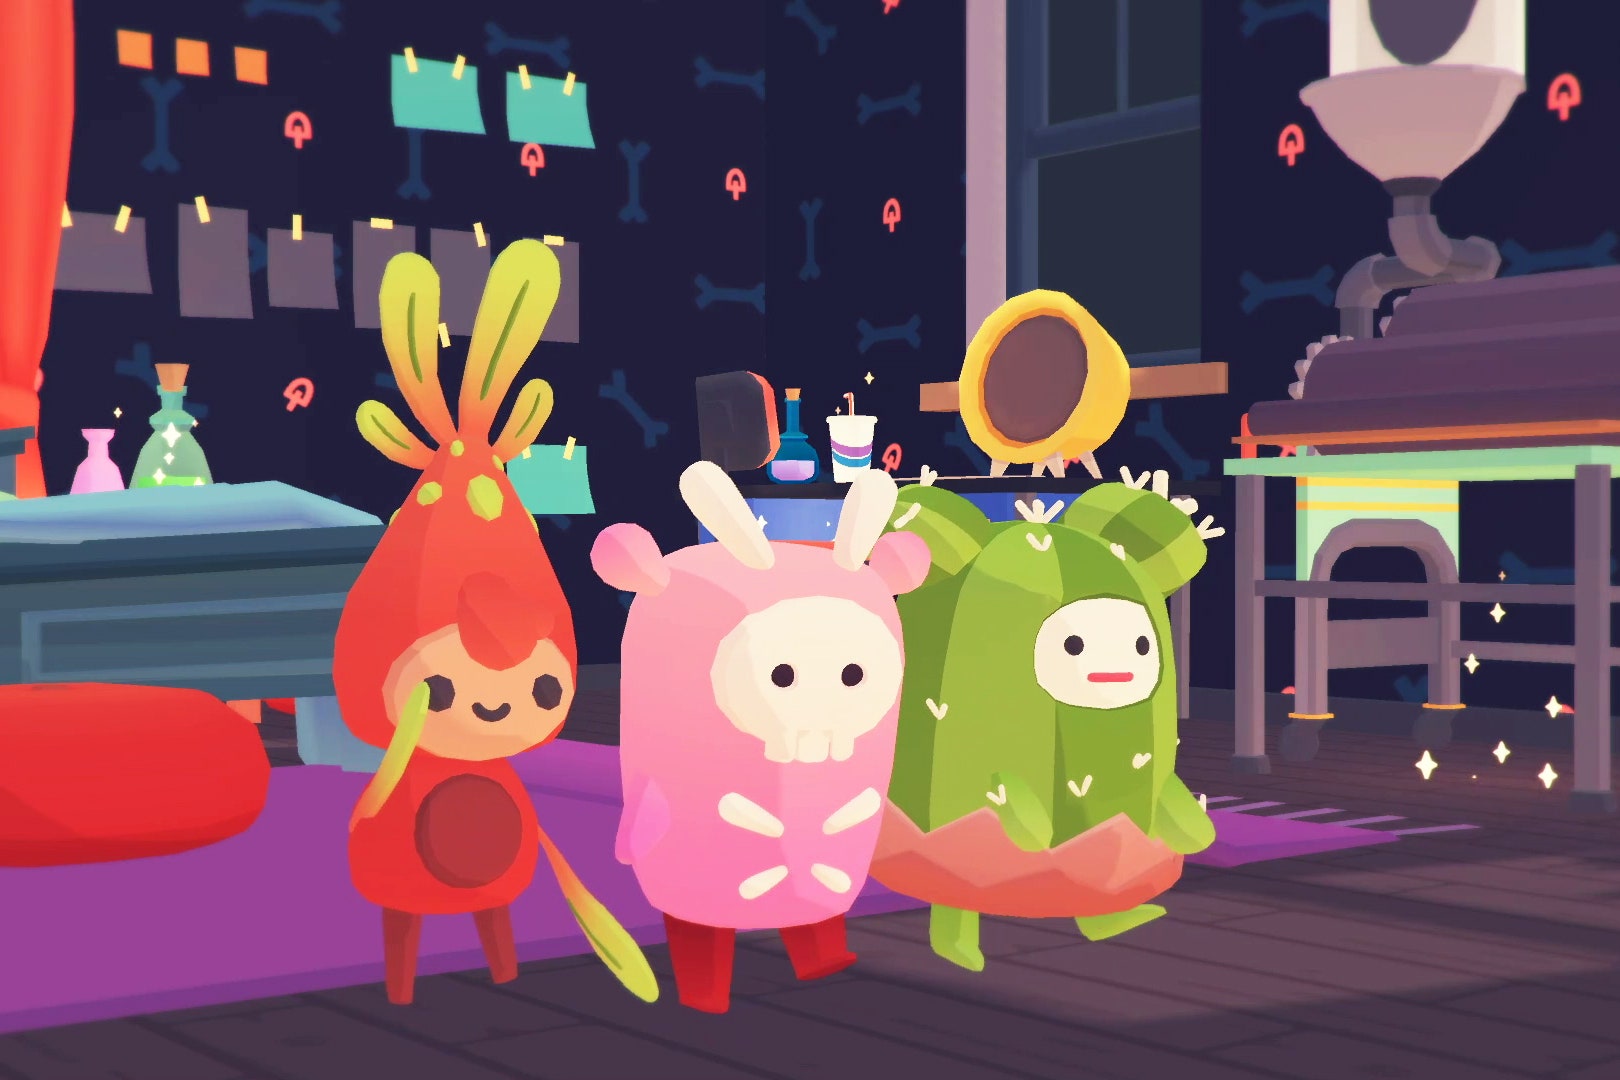 Sick of ‘Animal Crossing’? Are trying ‘Ooblets’